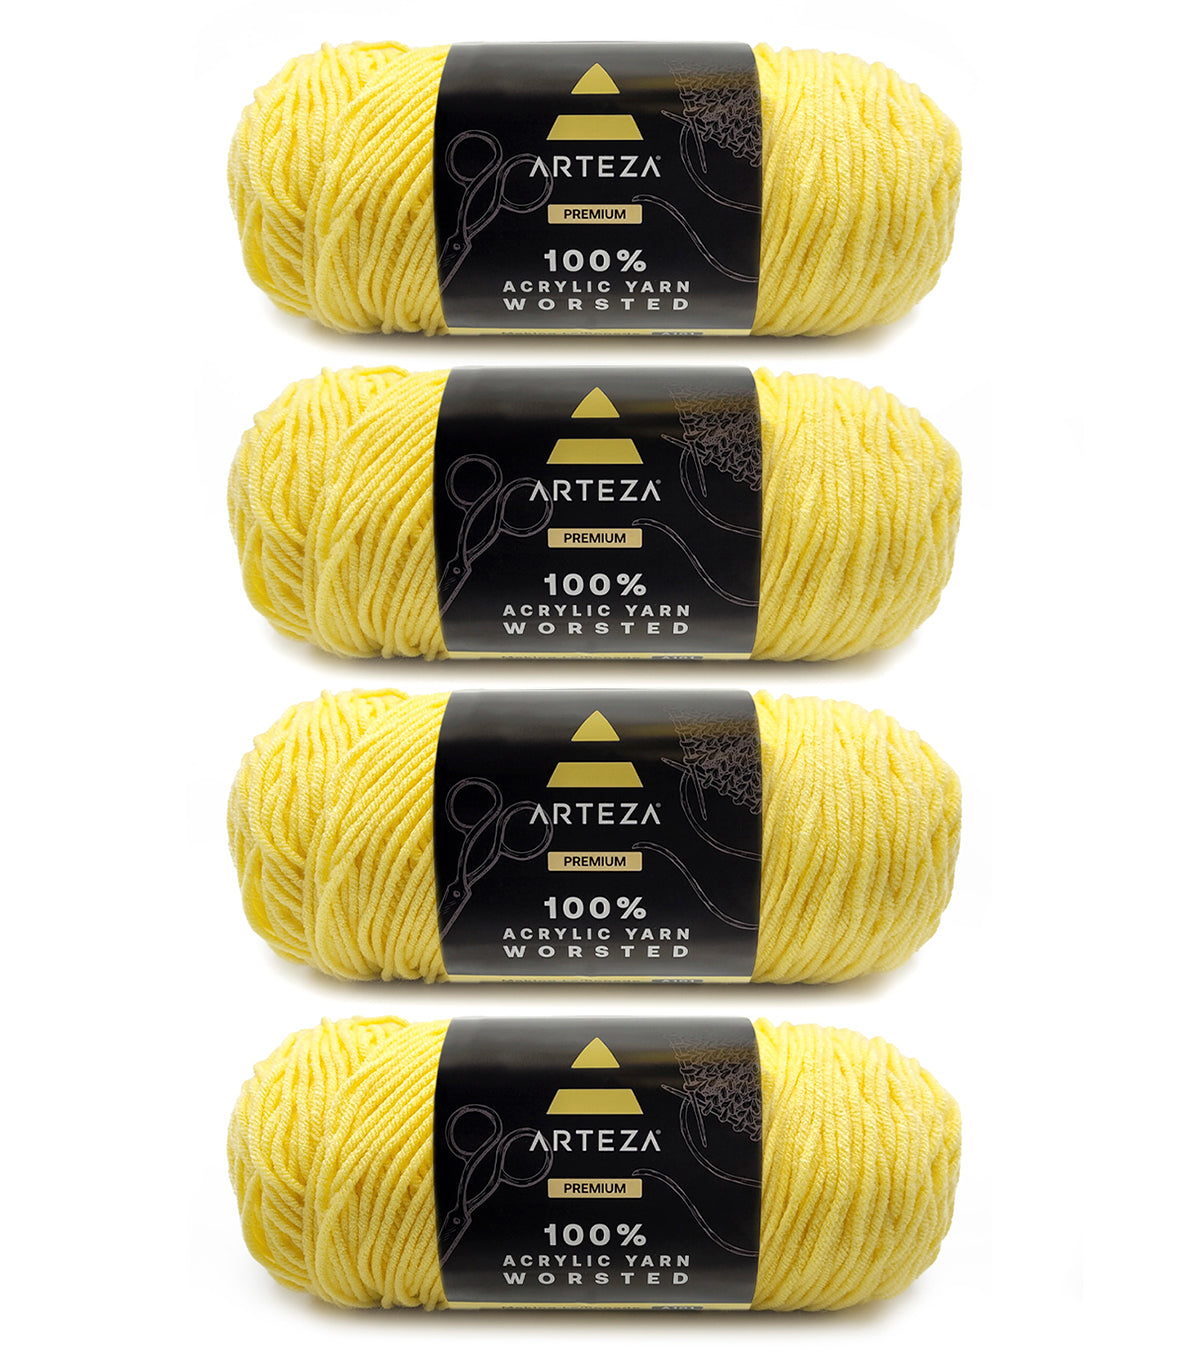  Arteza Acrylic Yarn for Crocheting, 4 x 200-g Skeins of  Worsted Yarn for Knitting, Half & Half A002, Machine Washable, Knitting &  Crochet Supplies – Use with Knitting Needles and